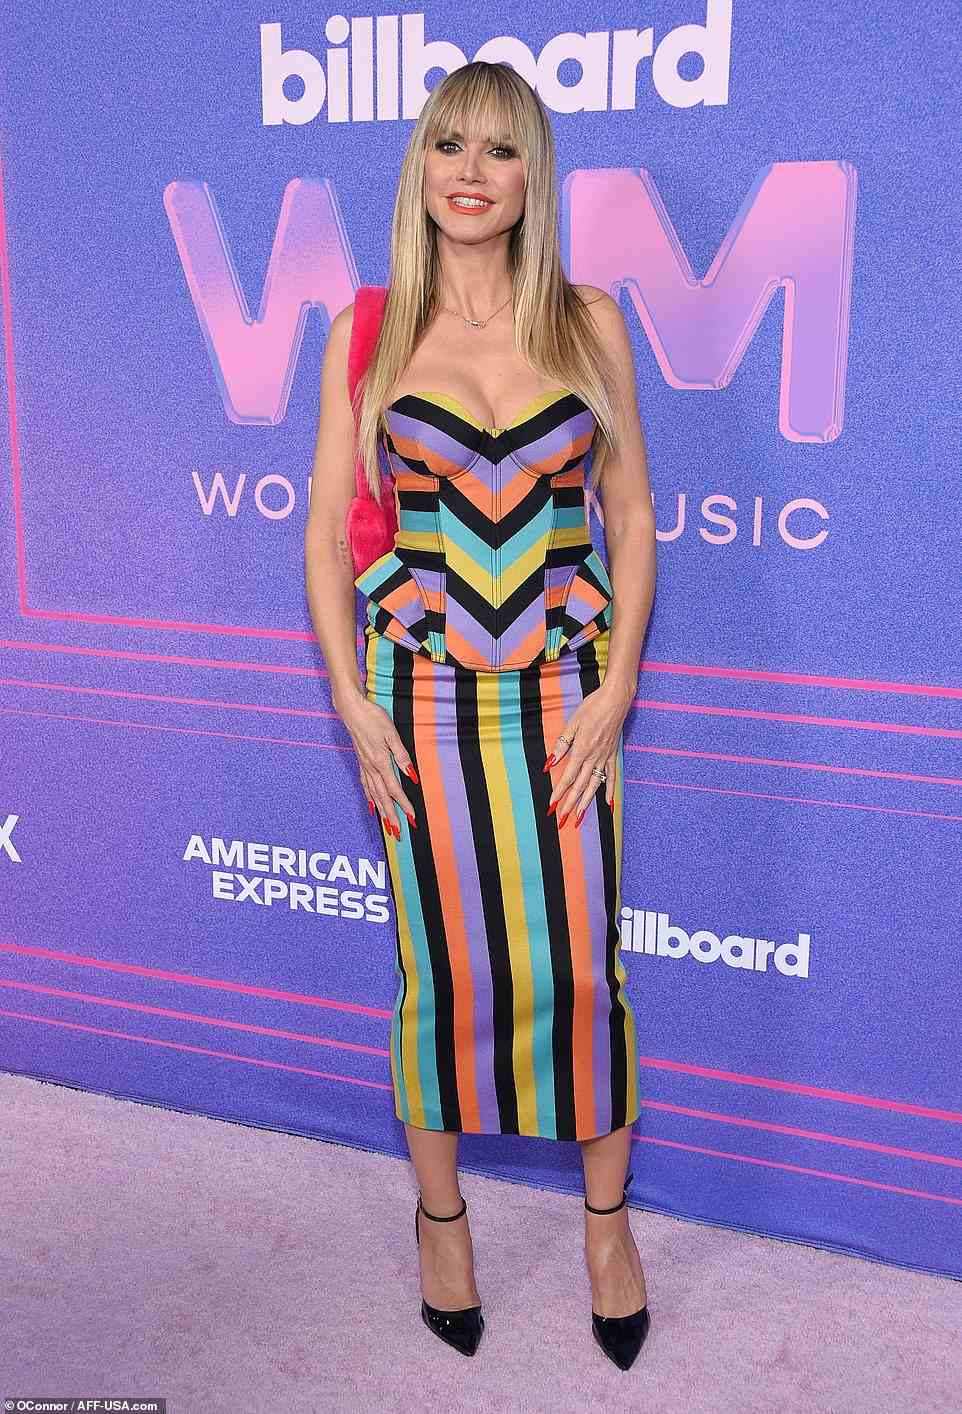 Quirky: Heidi Klum highlighted her slender frame in a colorful striped strapless dress with a quirky peplum.